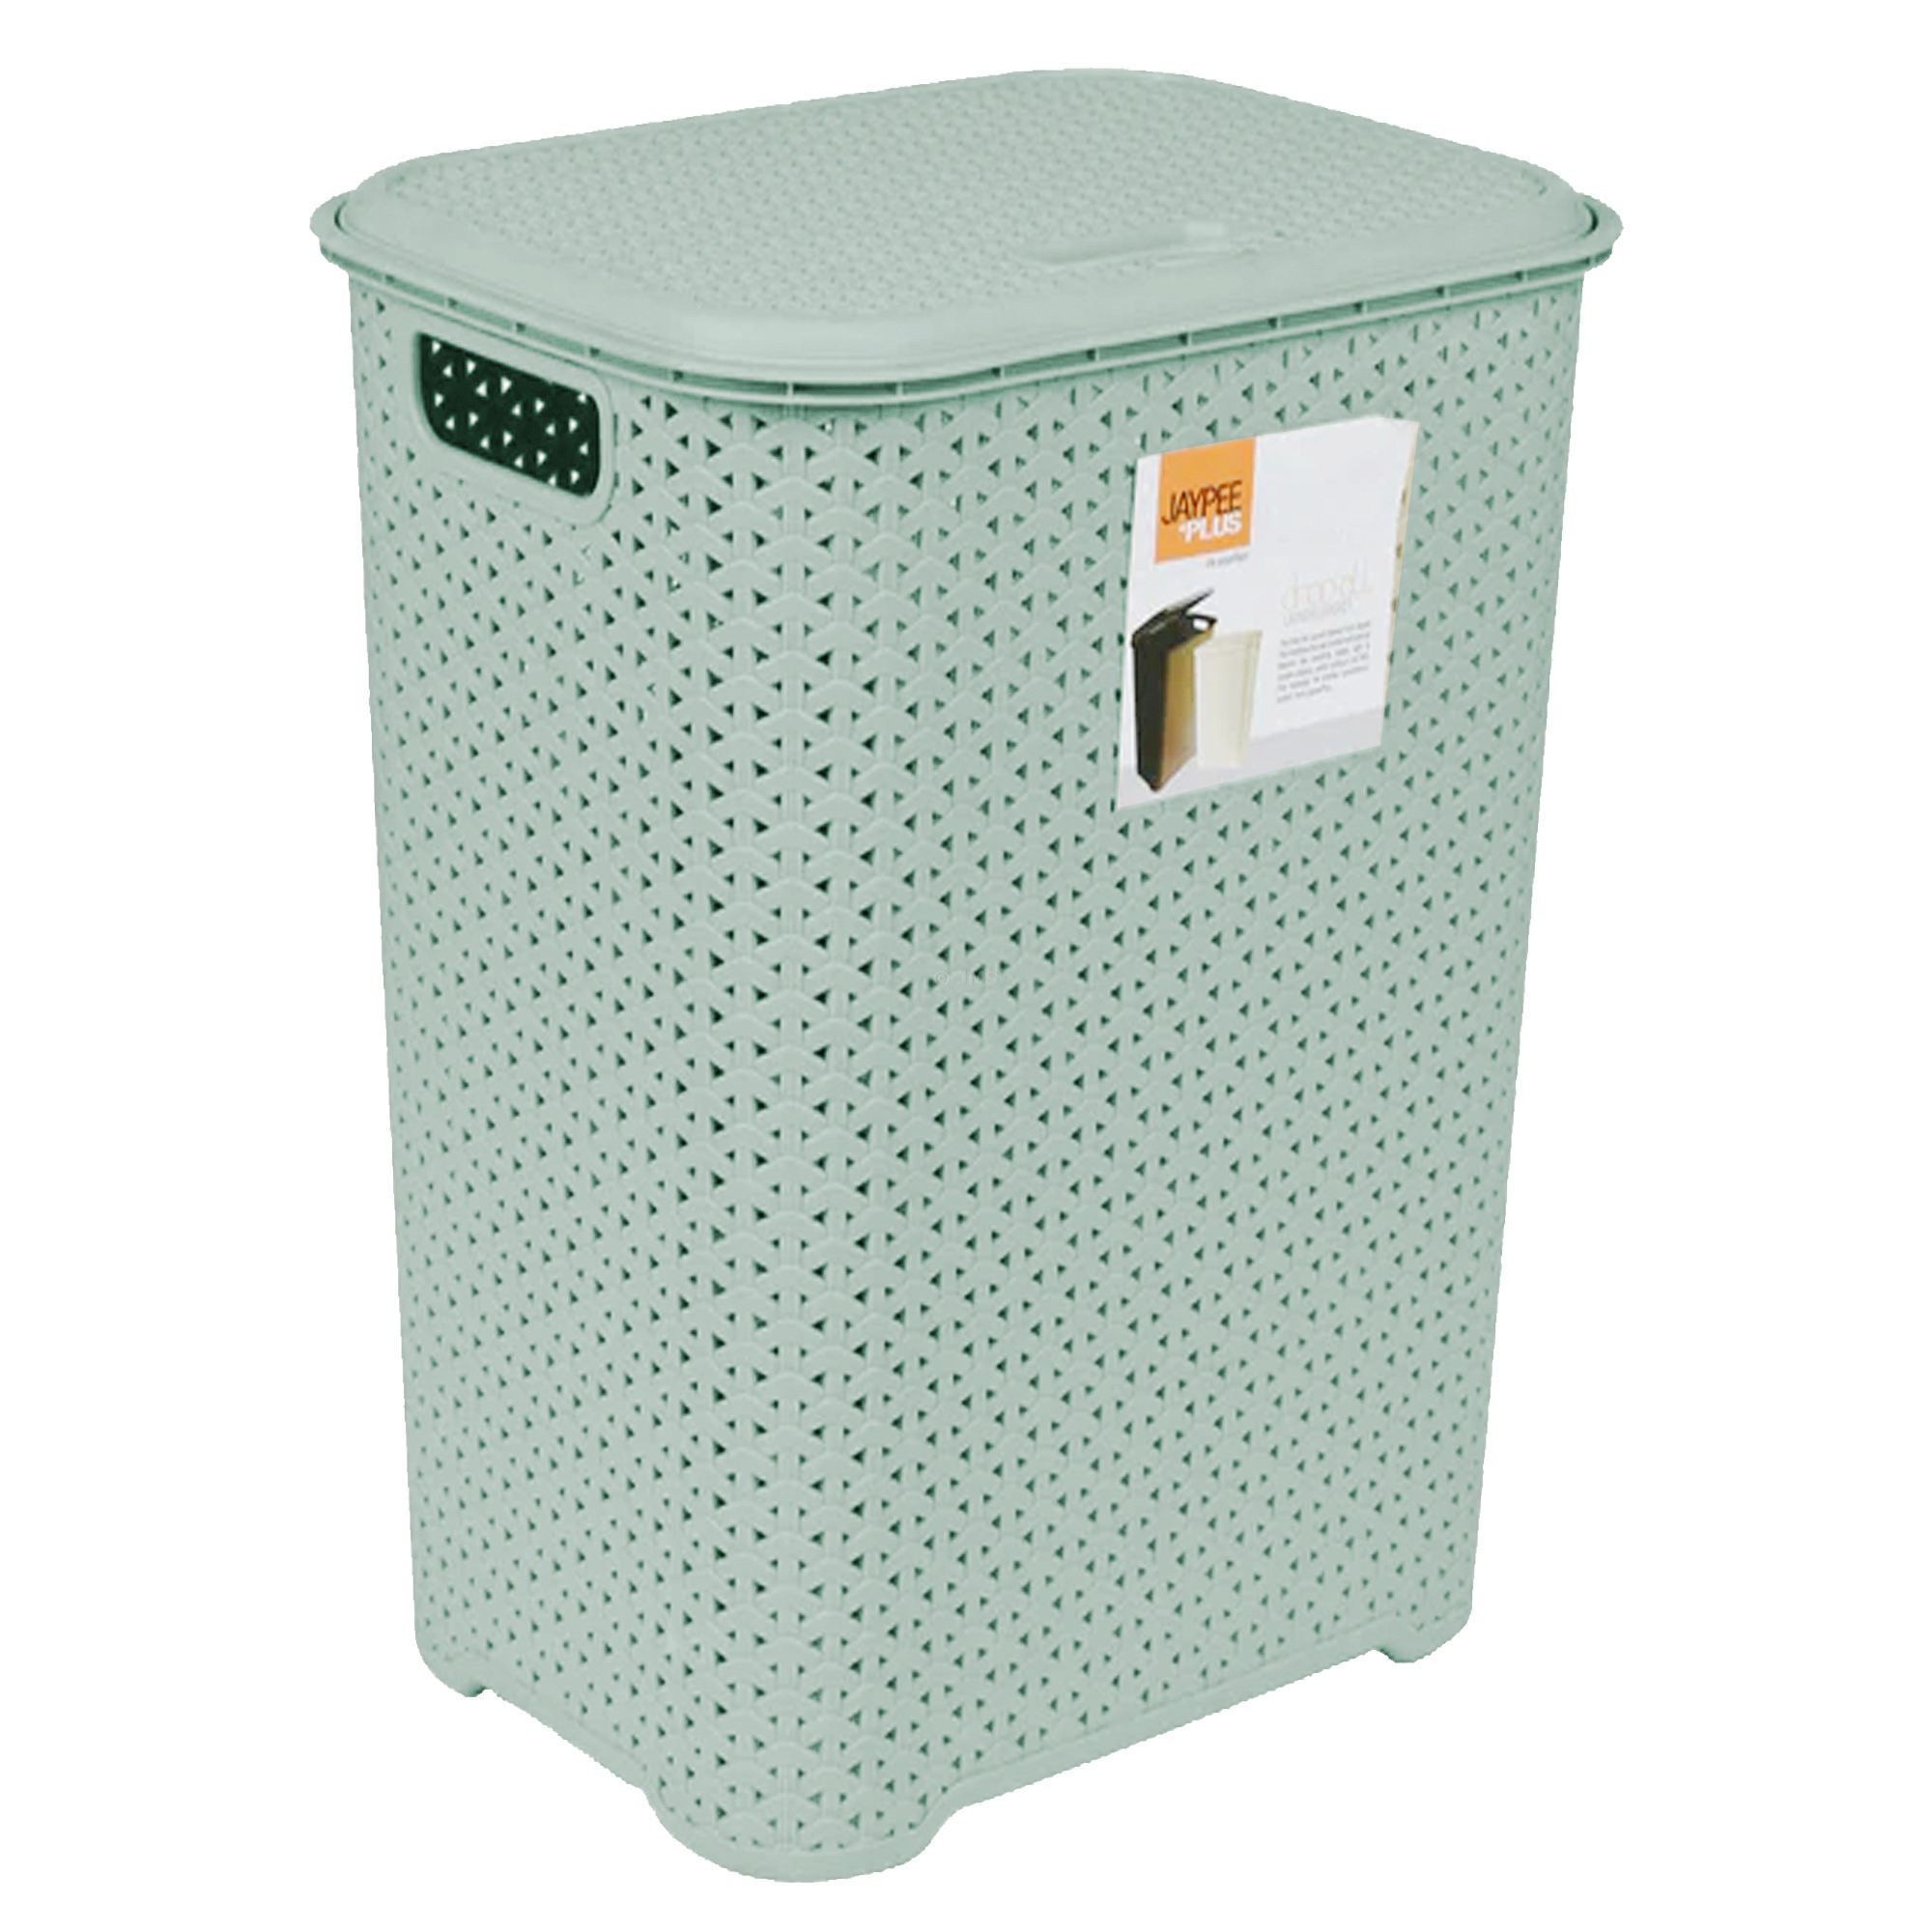 Drop All Large 65L Laundry Basket with Lid Plastic Washing Dirty Clothes Storage Linen Bin Tidy - Silver Sage